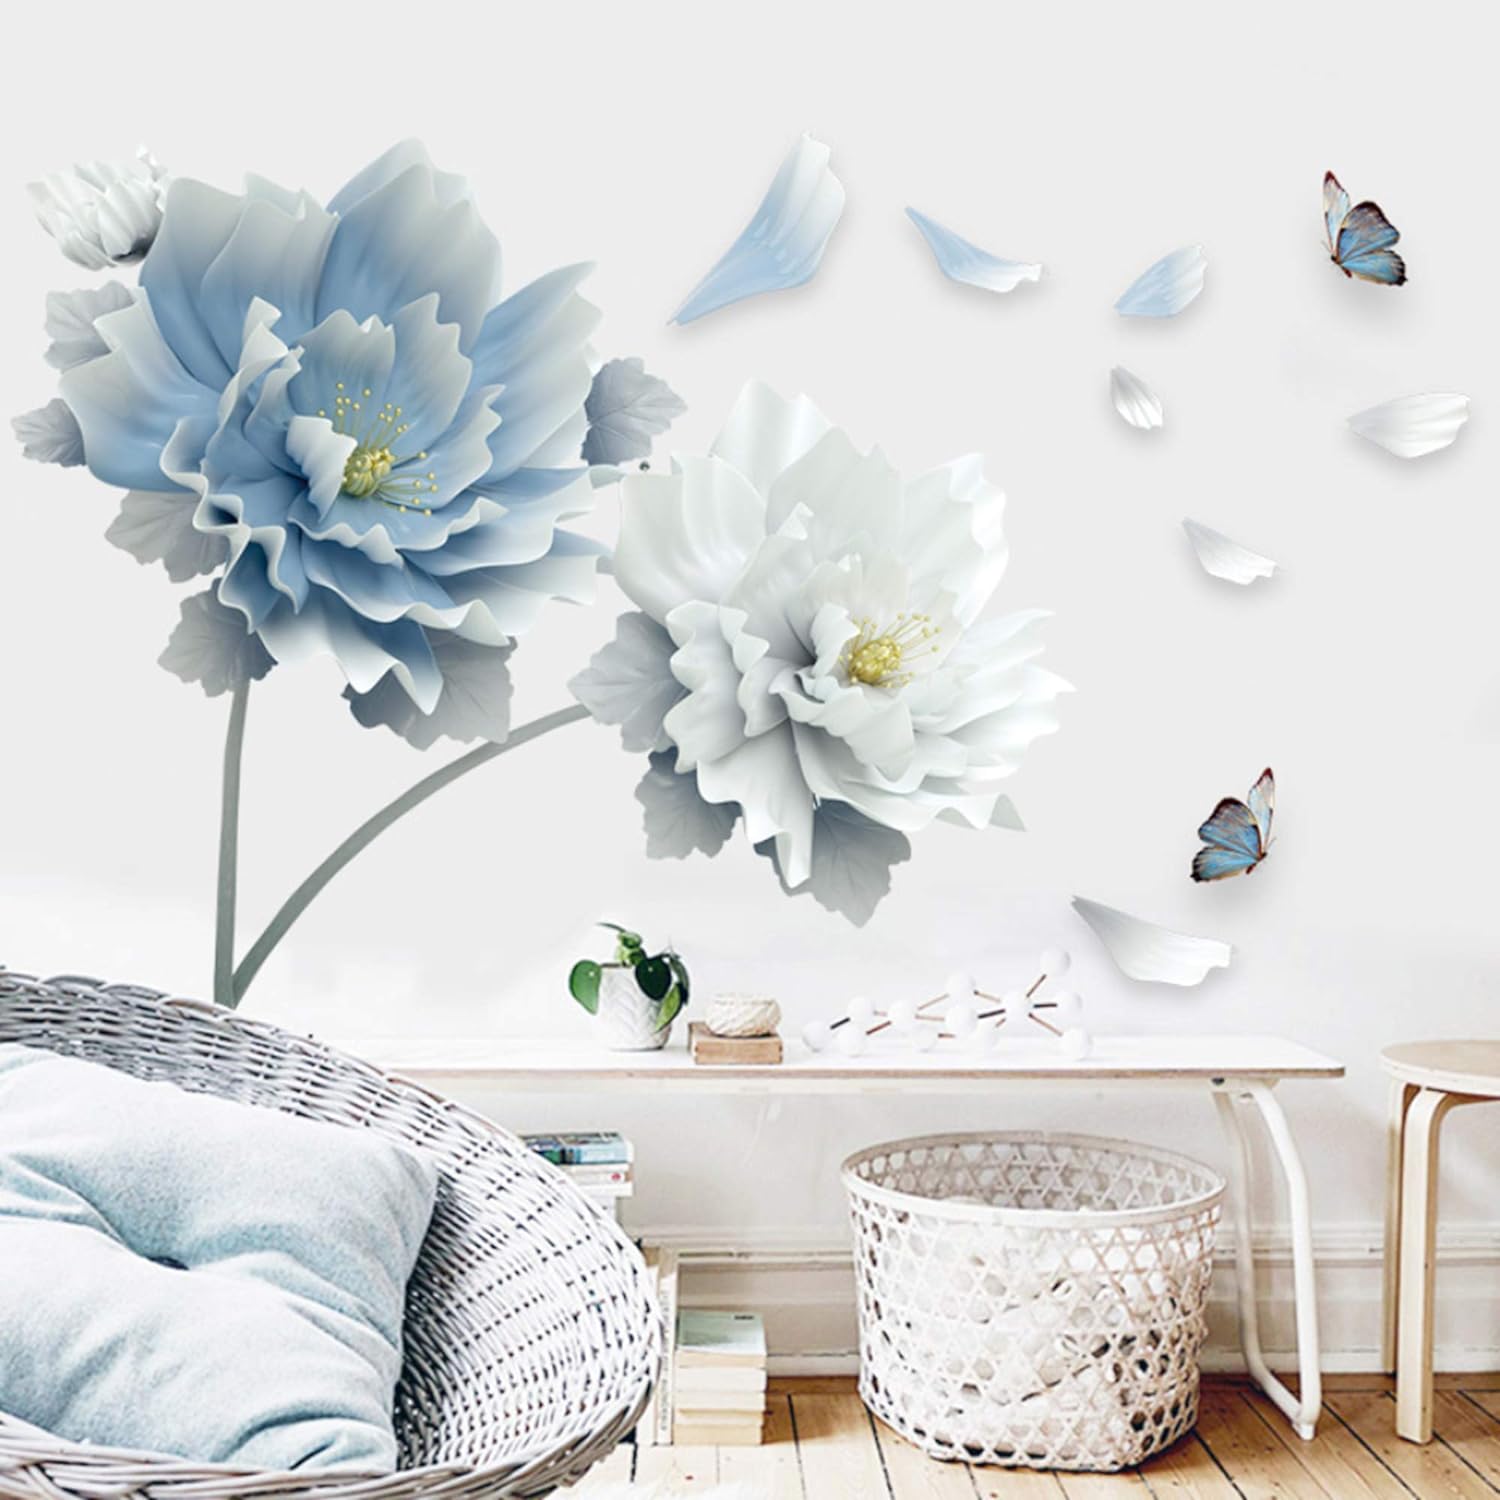 ROFARSO 49.2'' x 30.7'' 3D Blue Flowers Butterflies Wall Stickers Vinyl Removable Large Wall Decals Art Decorations Decor for Bedroom Living Room Office Study Room Murals